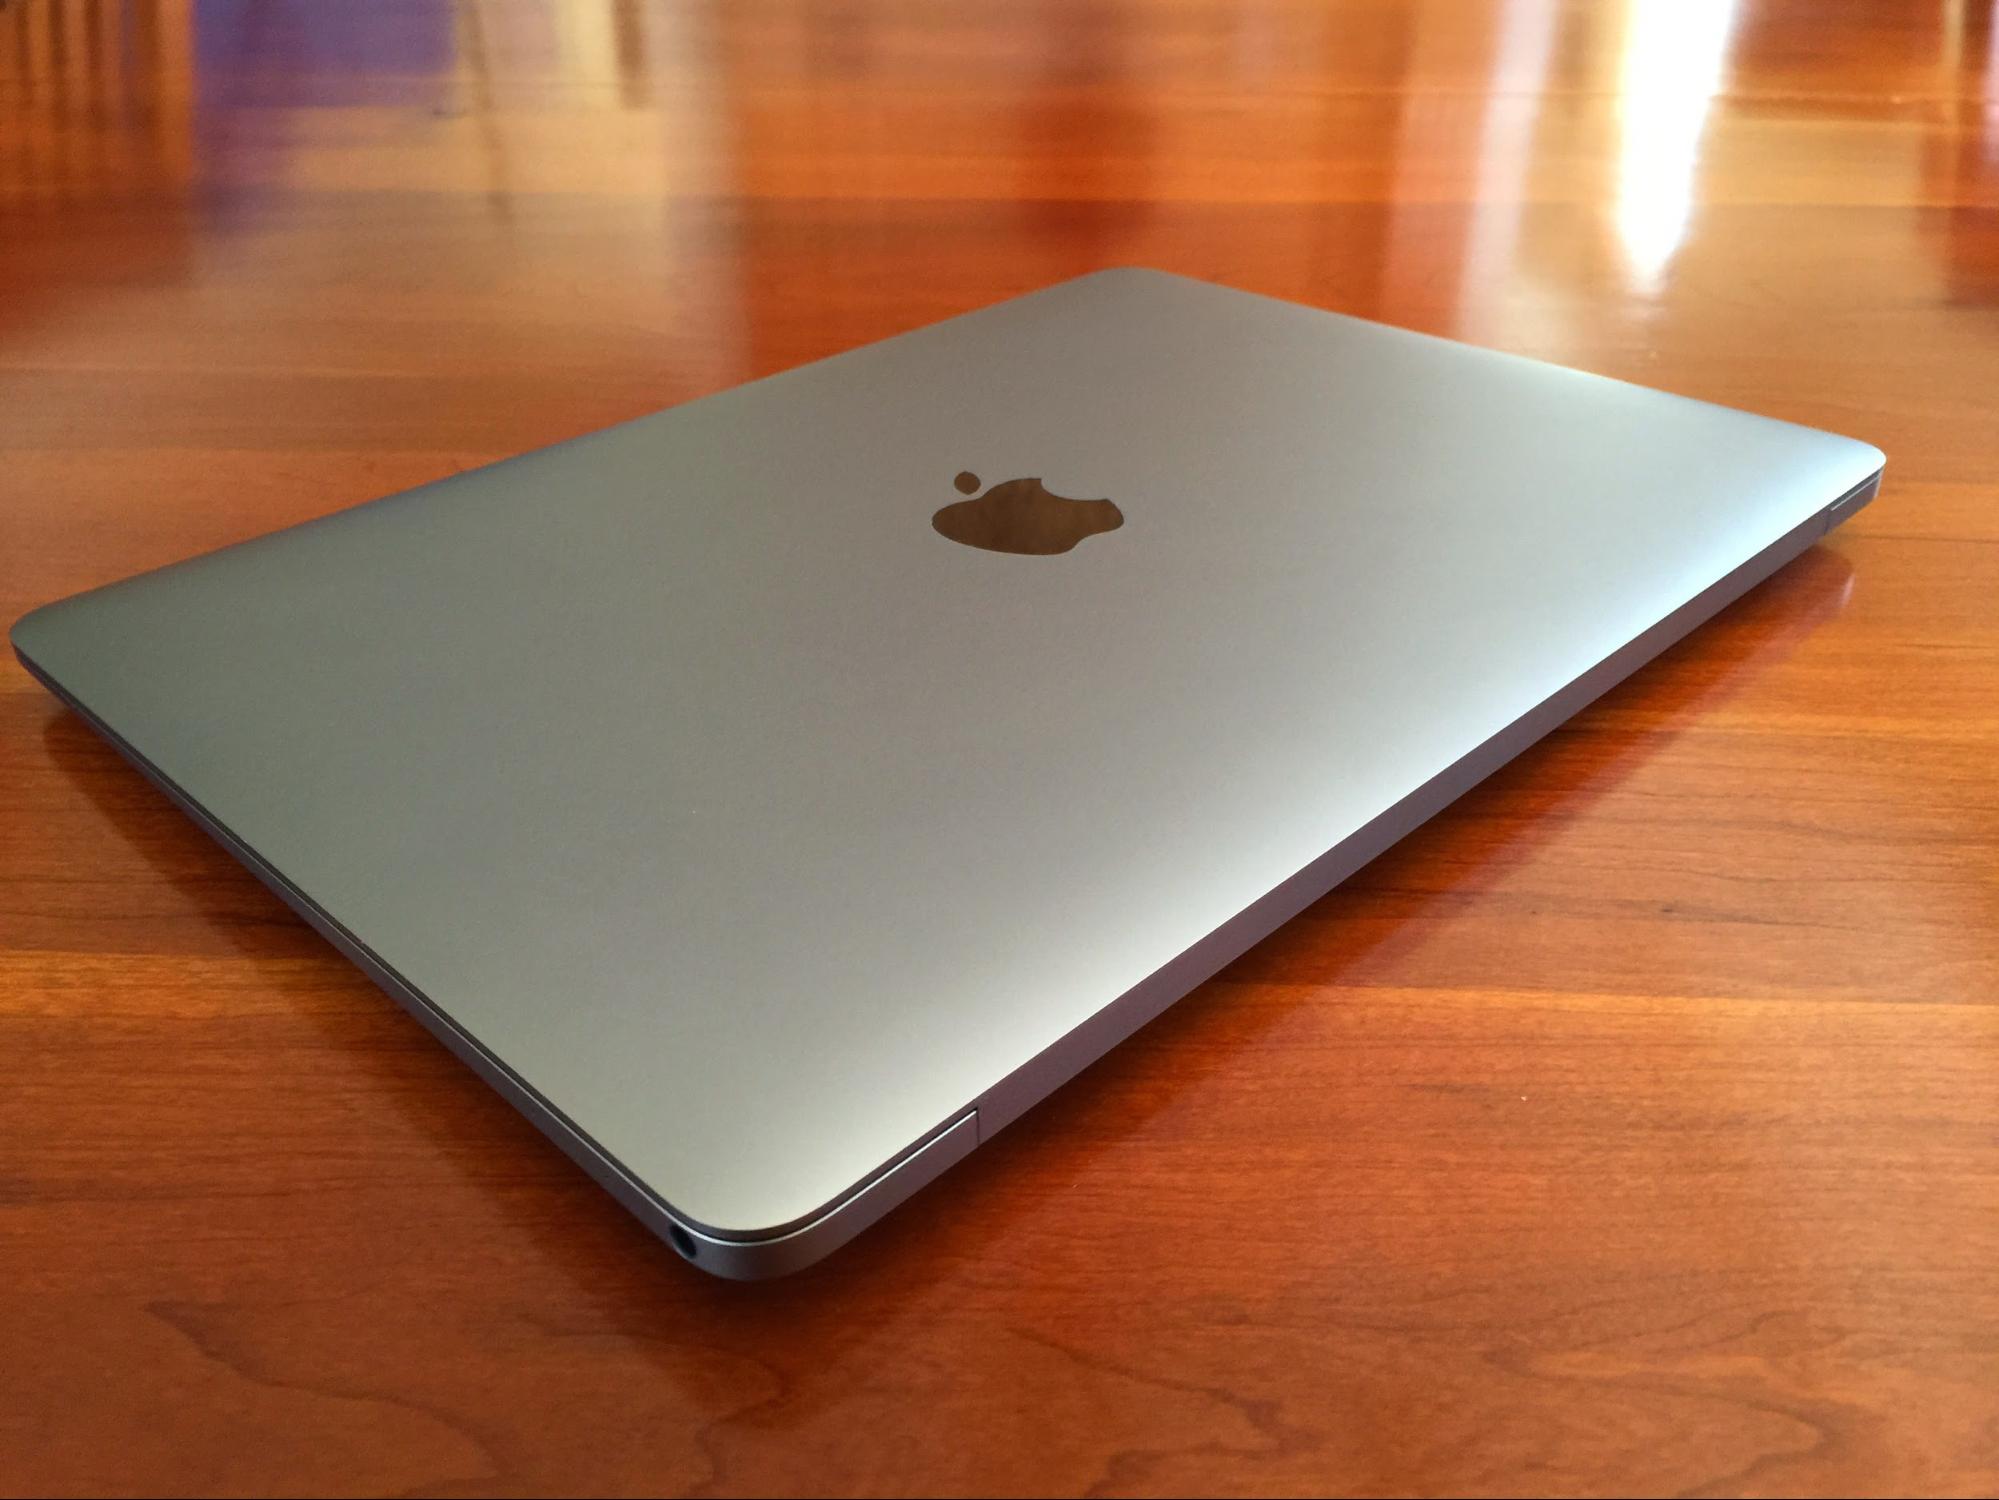 The 12-inch MacBook: A Different Mac for a Particular User - TidBITS